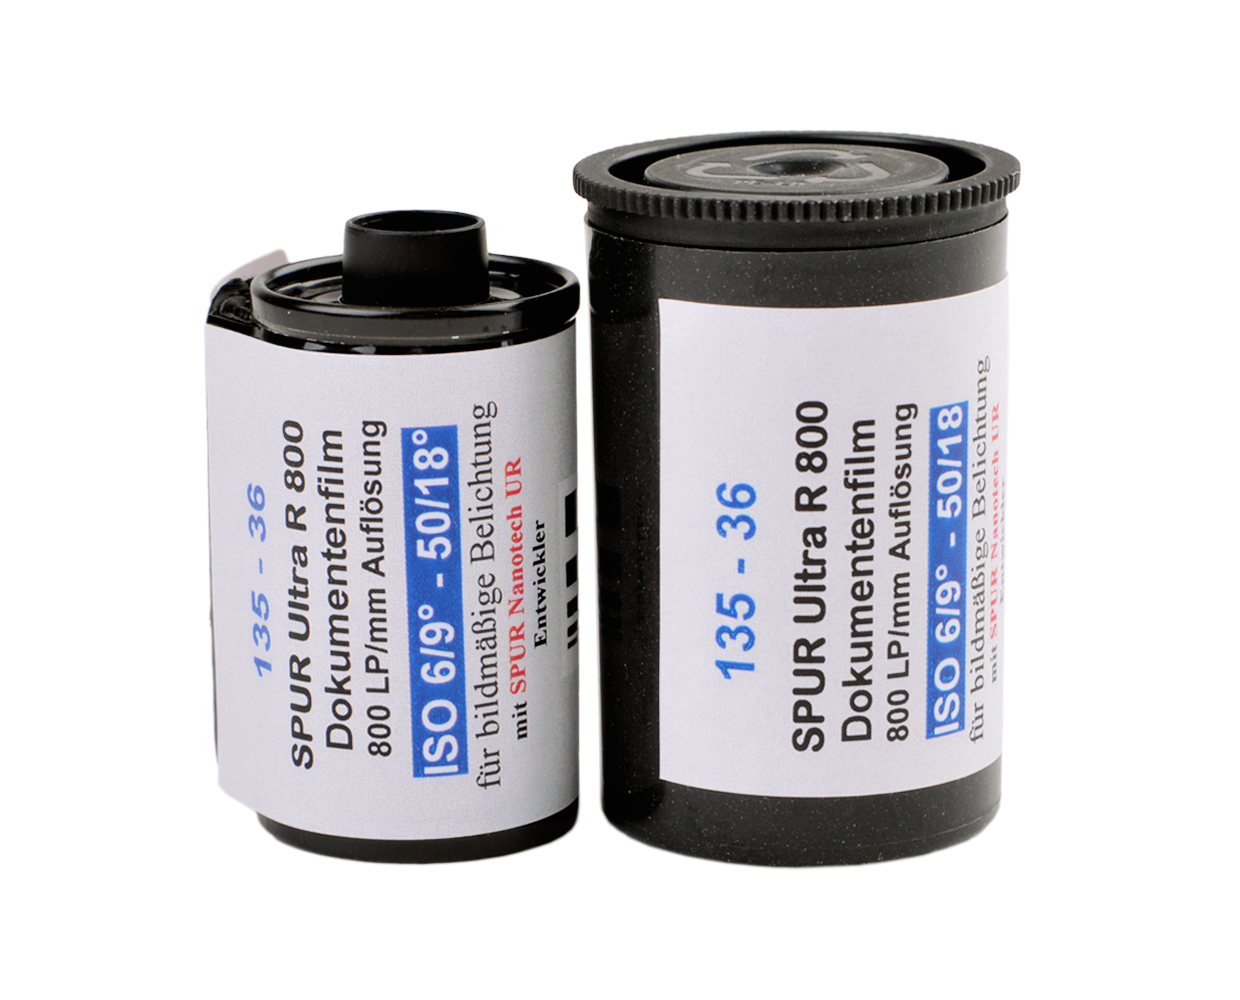 R Rated 35mm Movie Film Stock